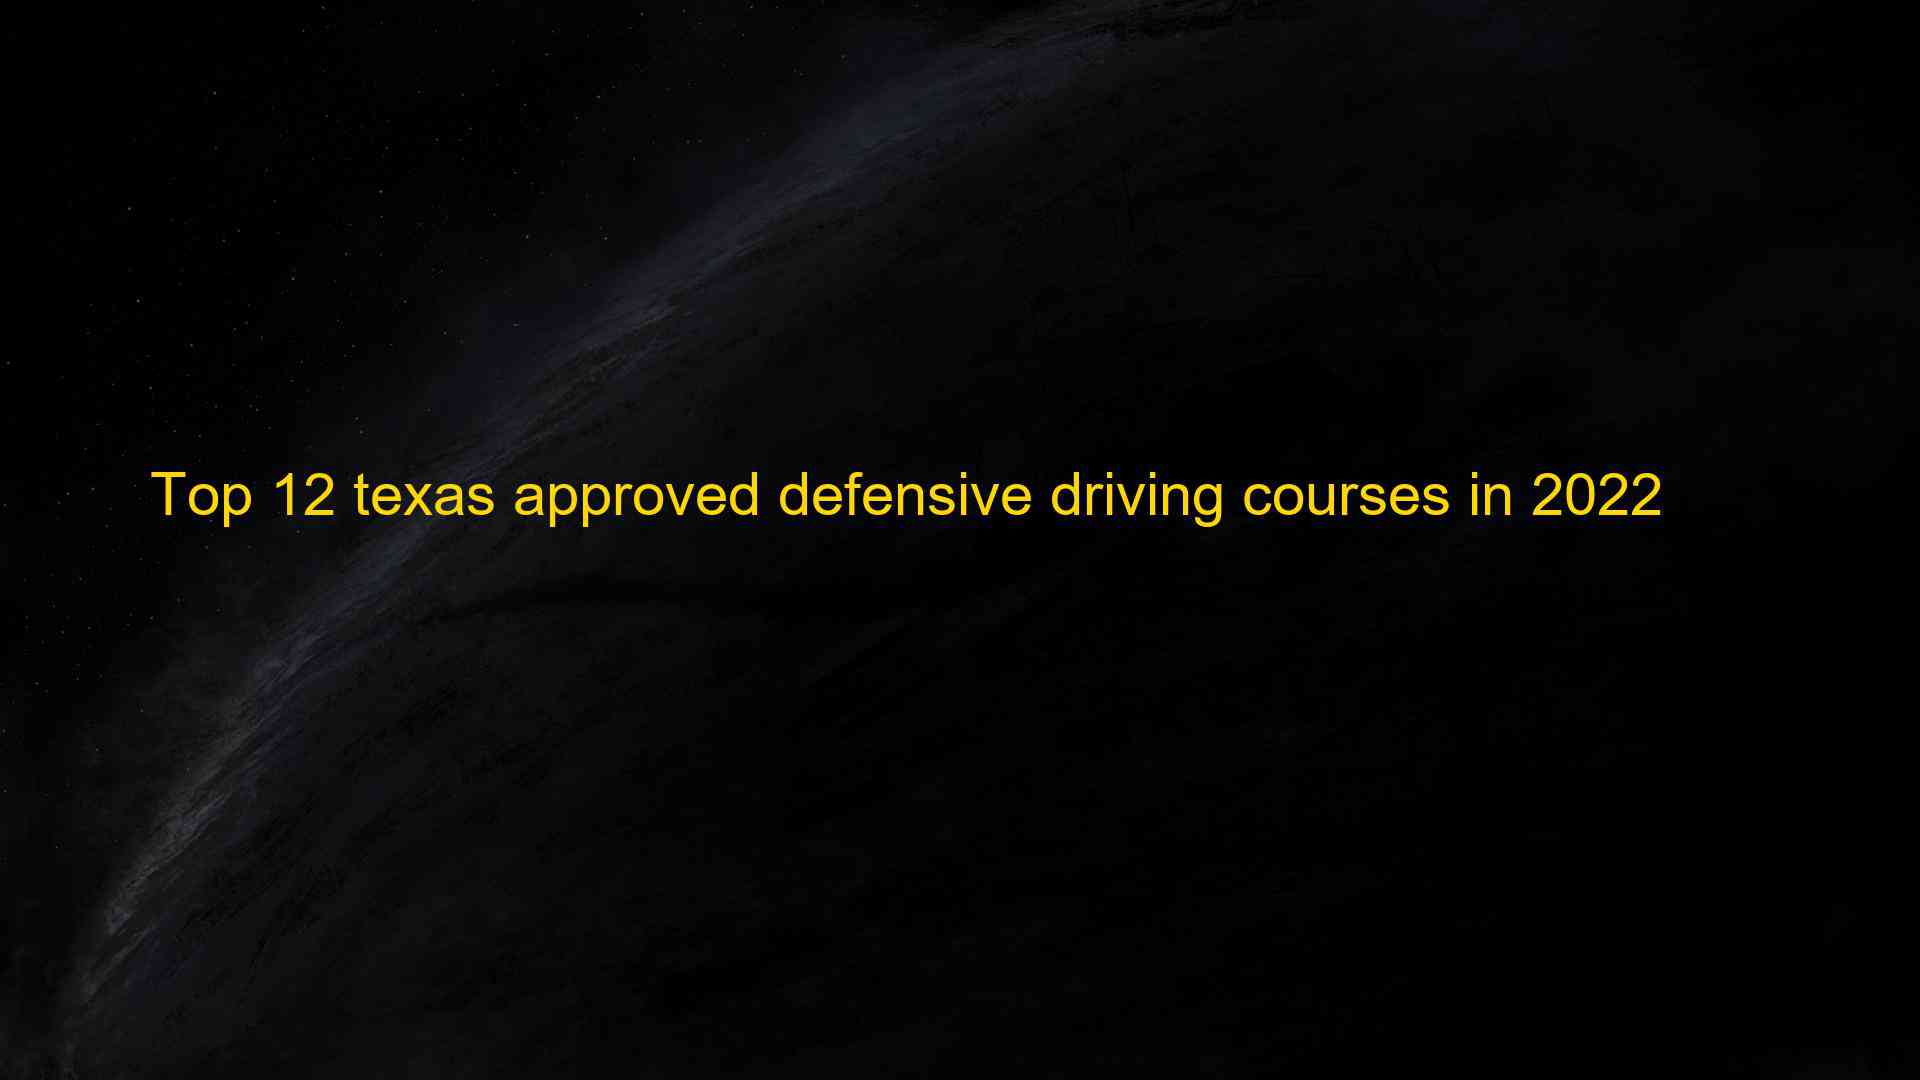 Top 12 texas approved defensive driving courses in 2022 1661928568